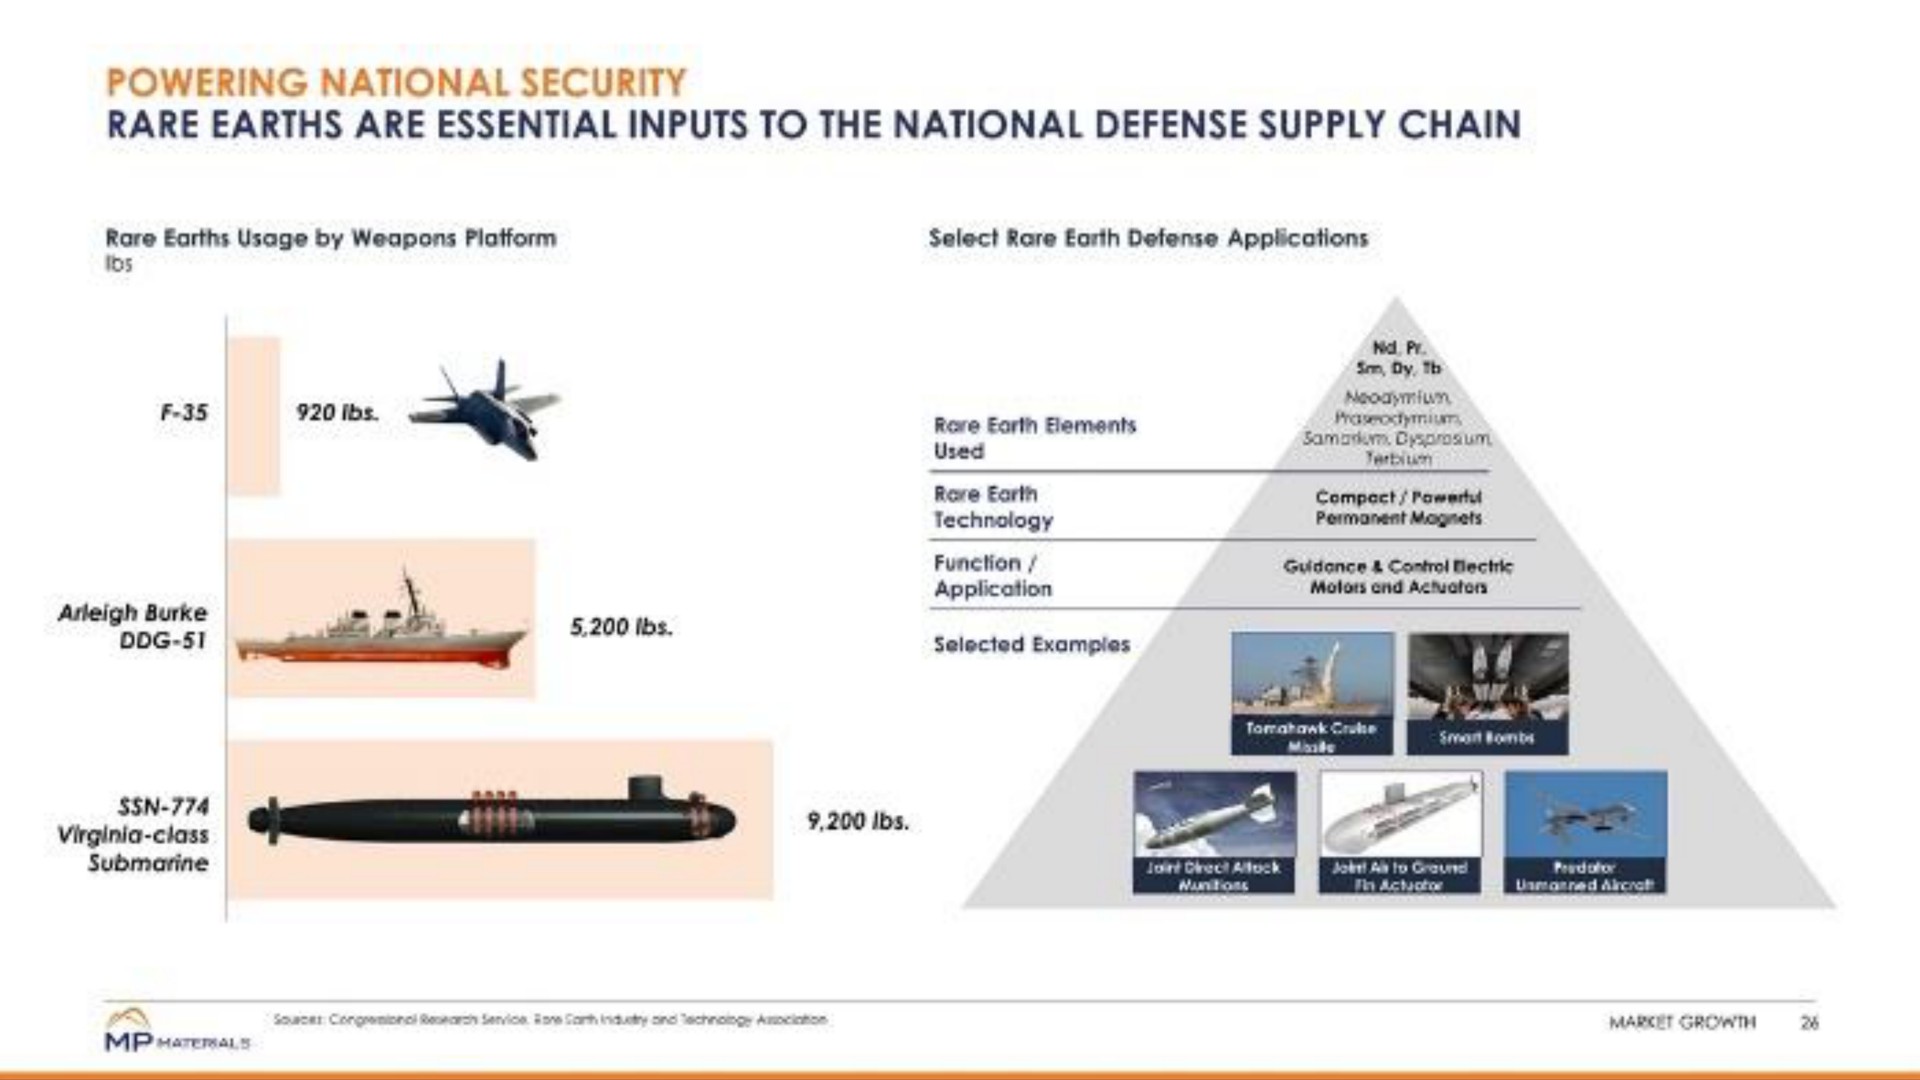 powering national security rare earths are essential inputs to the national defense supply chain | MP Materials